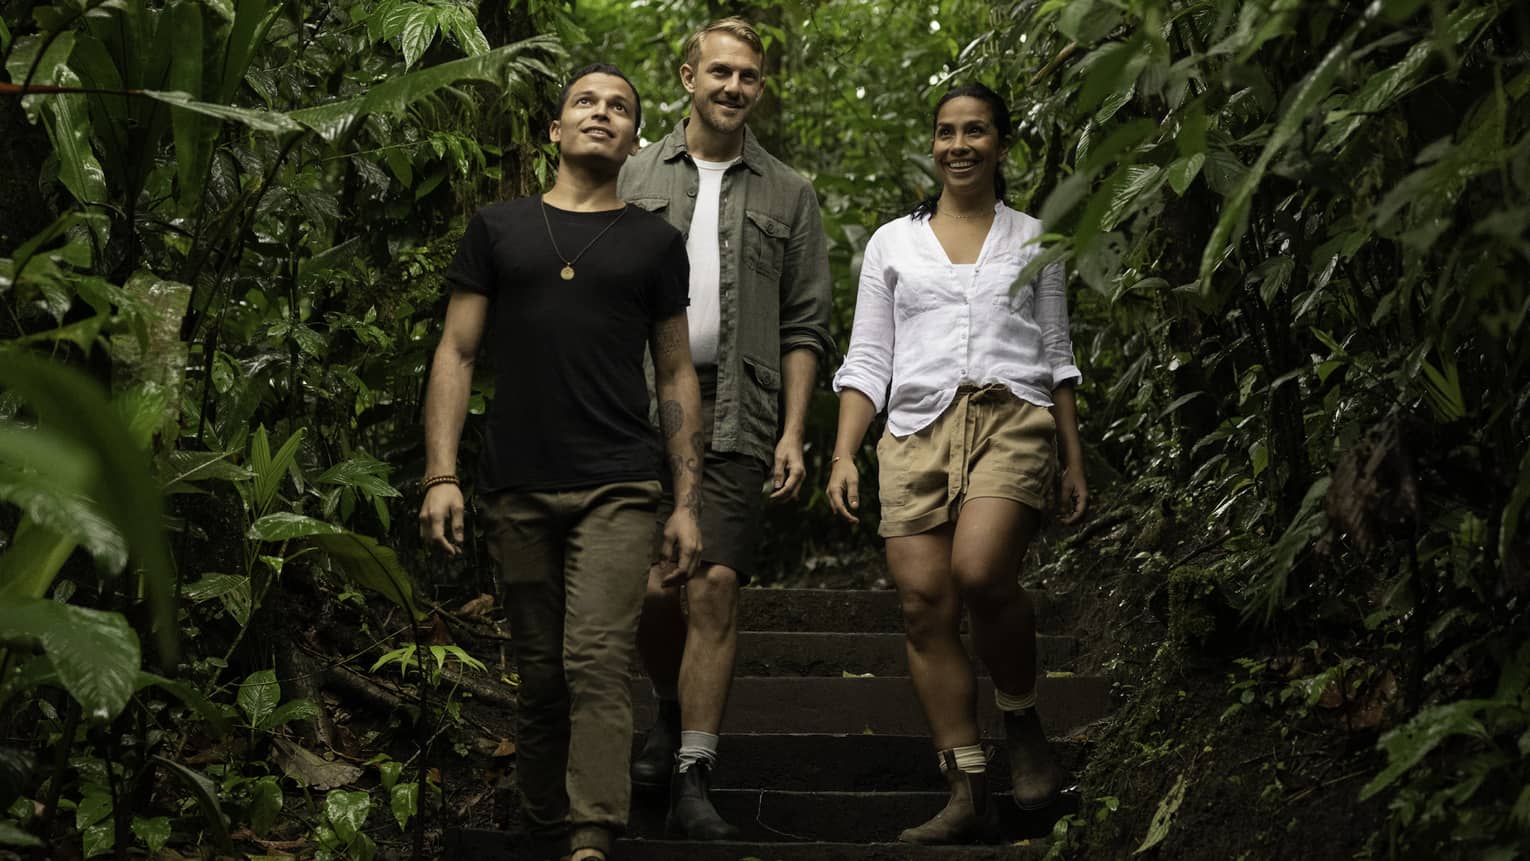 Three adventurous hikers smile as they walk down a wooden staircase surrounded by the lush green foliage of a rainforest.